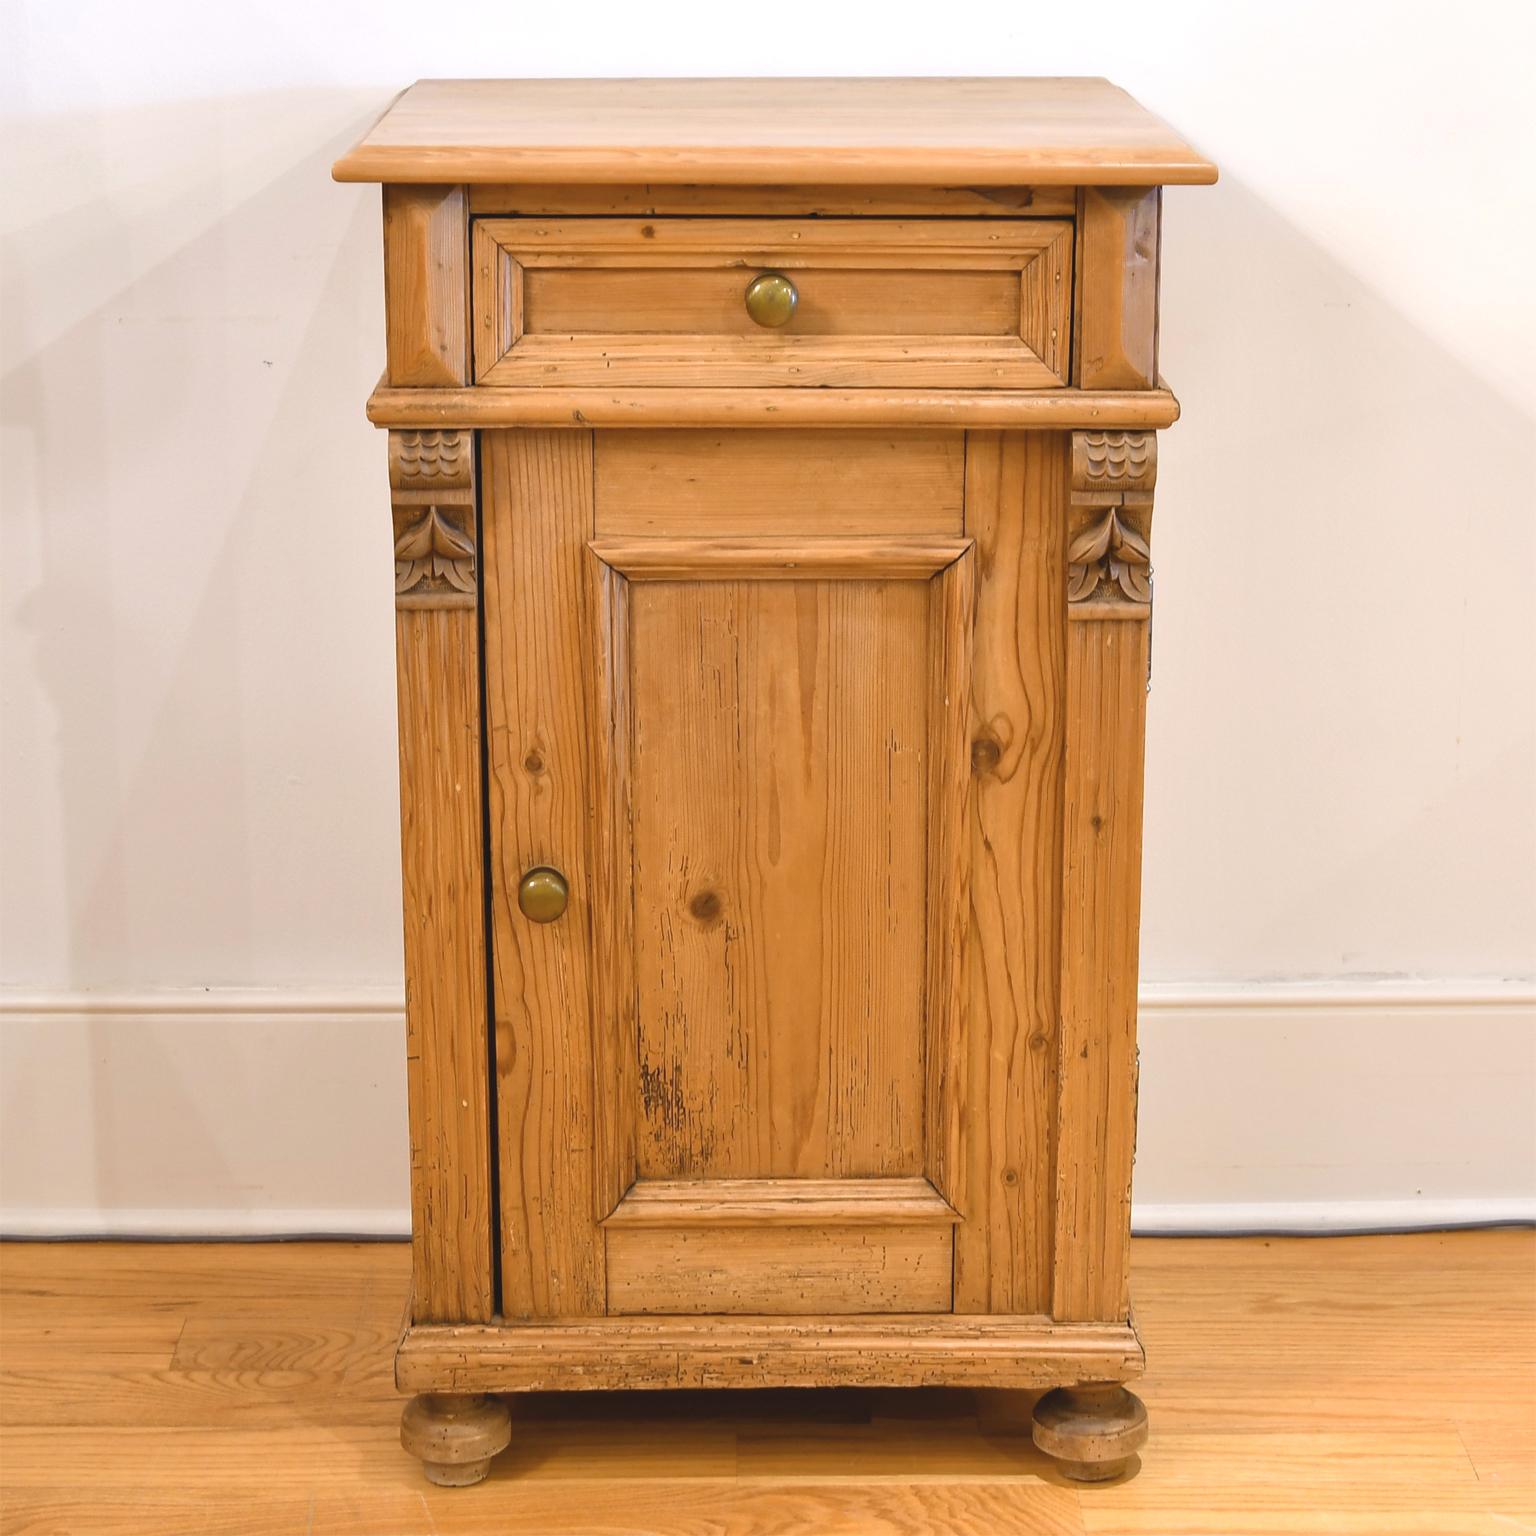 Austro-Hungarian pot cupboard or nightstand in scrubbed & waxed European pine offering a paneled drawer above a paneled cabinet with fluted pilasters on the sides & carved decorative escutcheons. Cabinet comes with brass pulls, interior shelving &